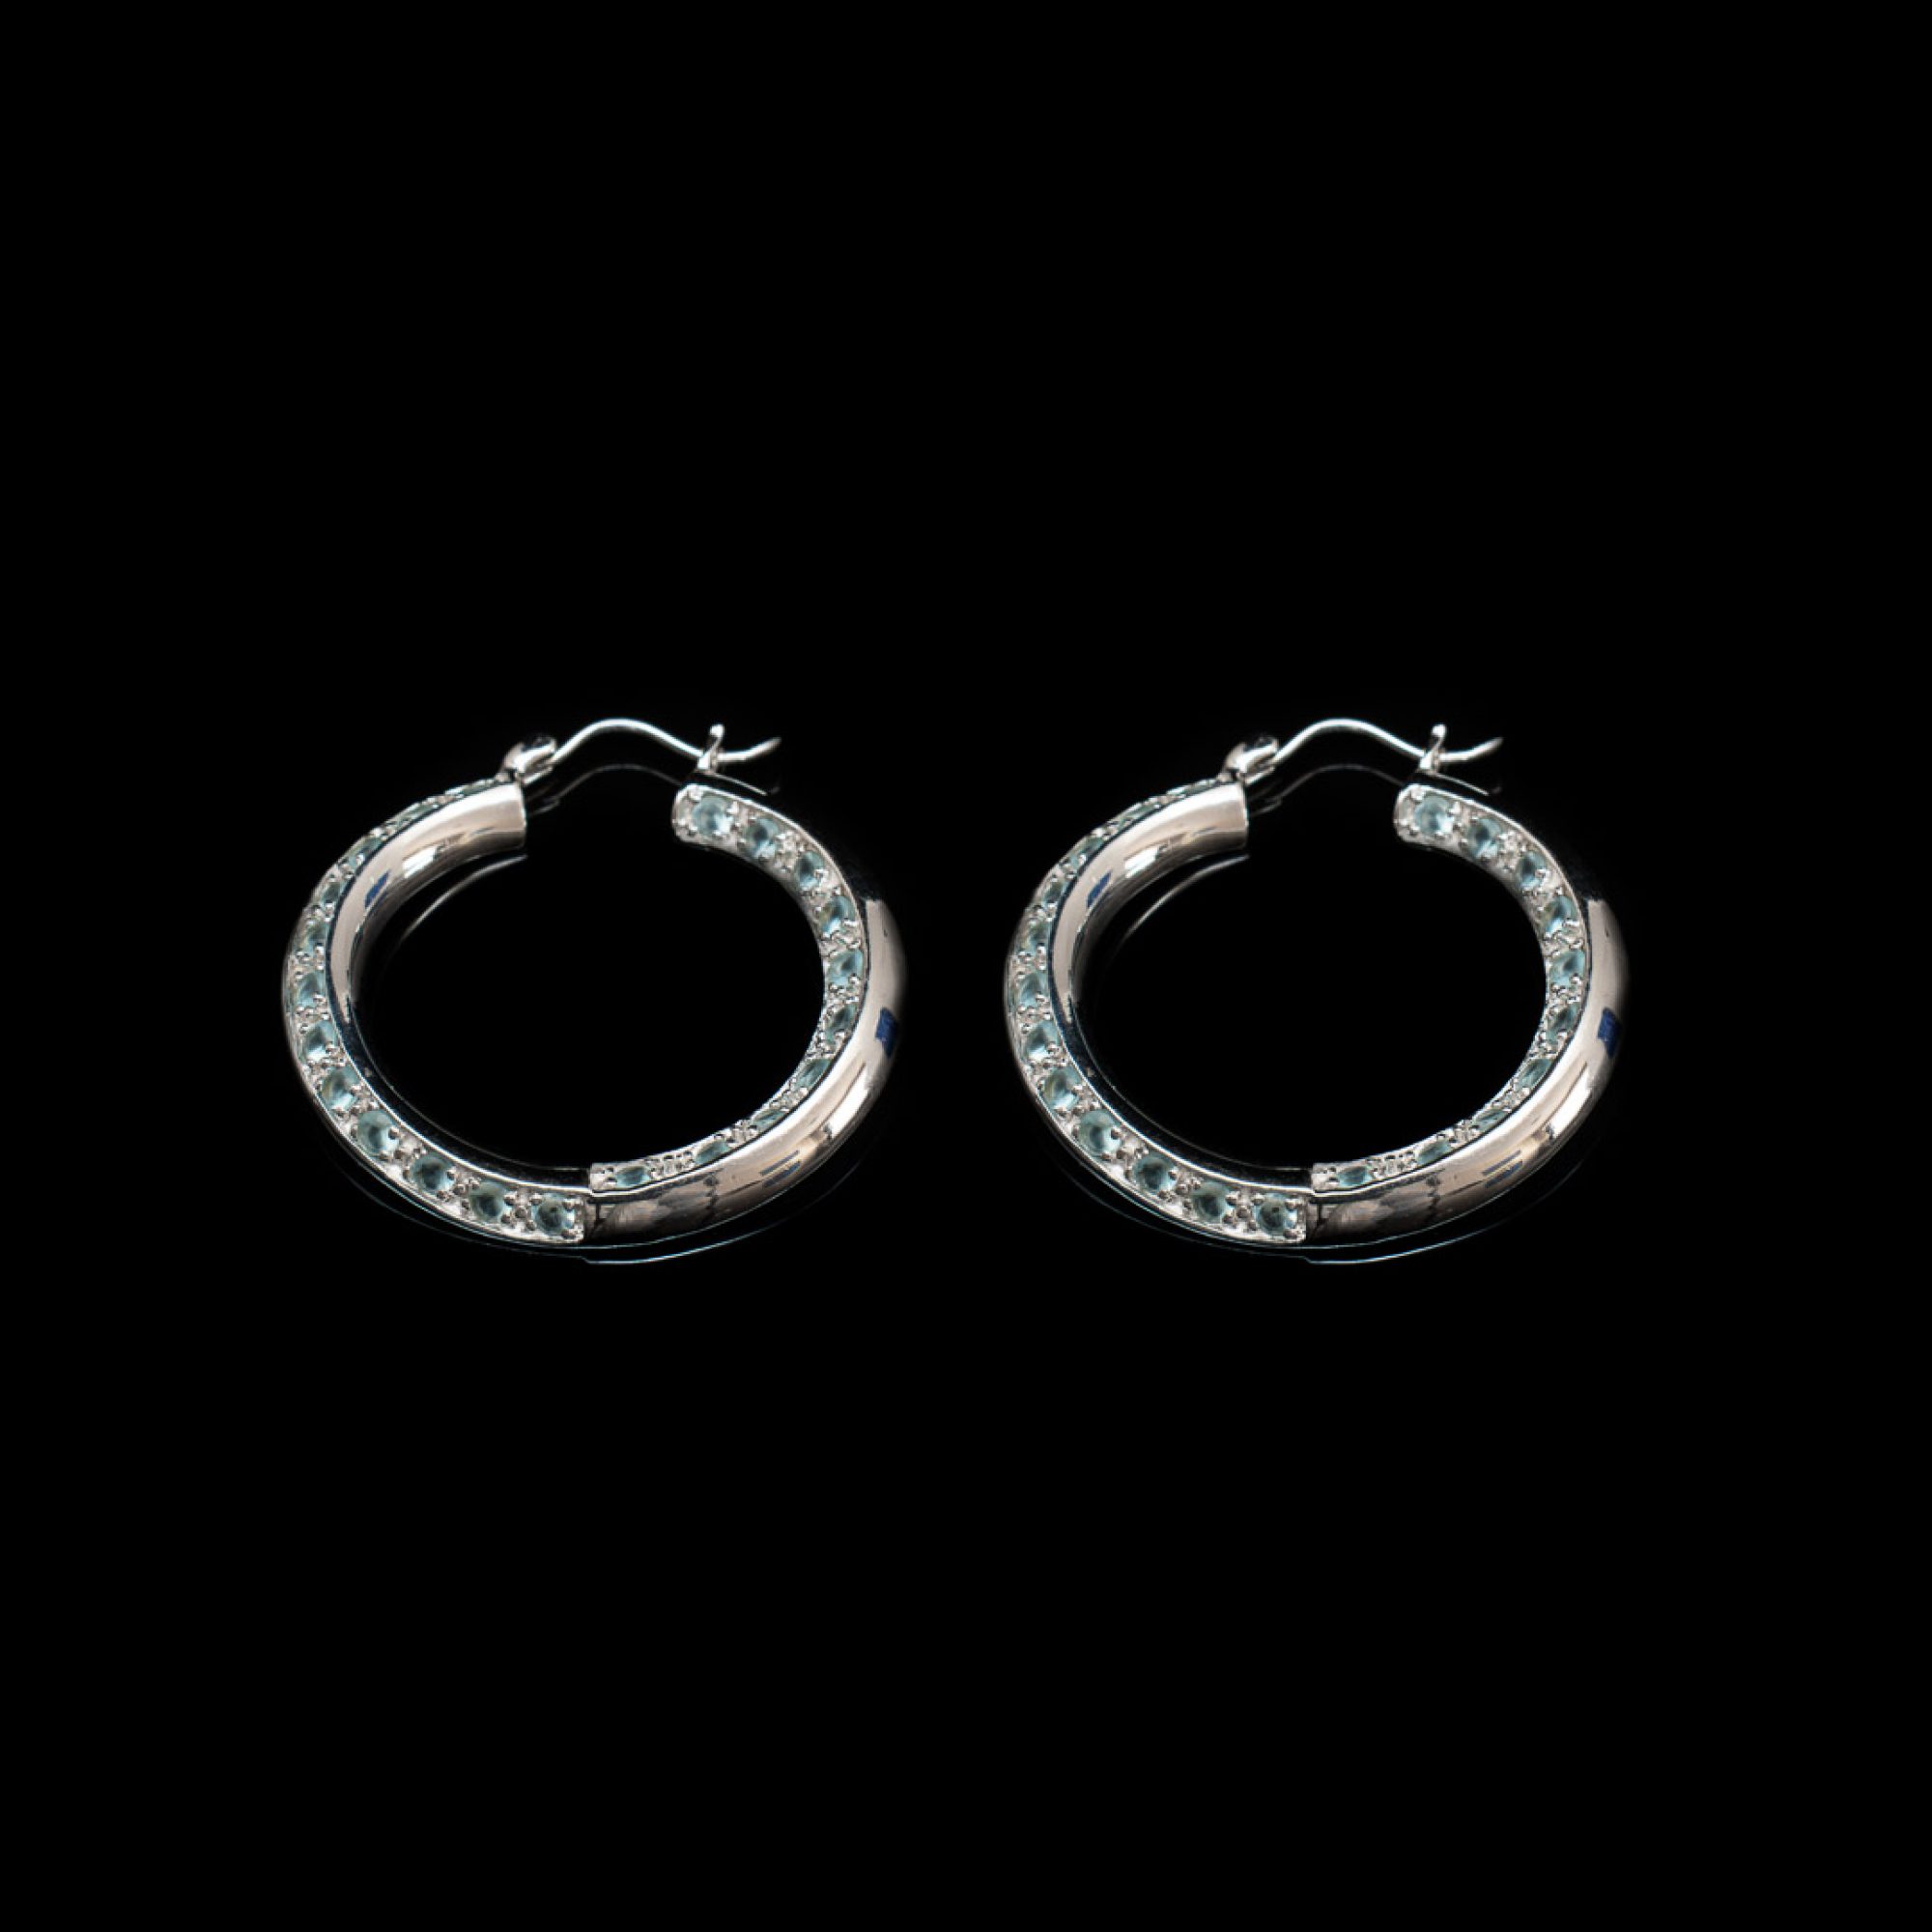 Silver hoops with aquamarine stones